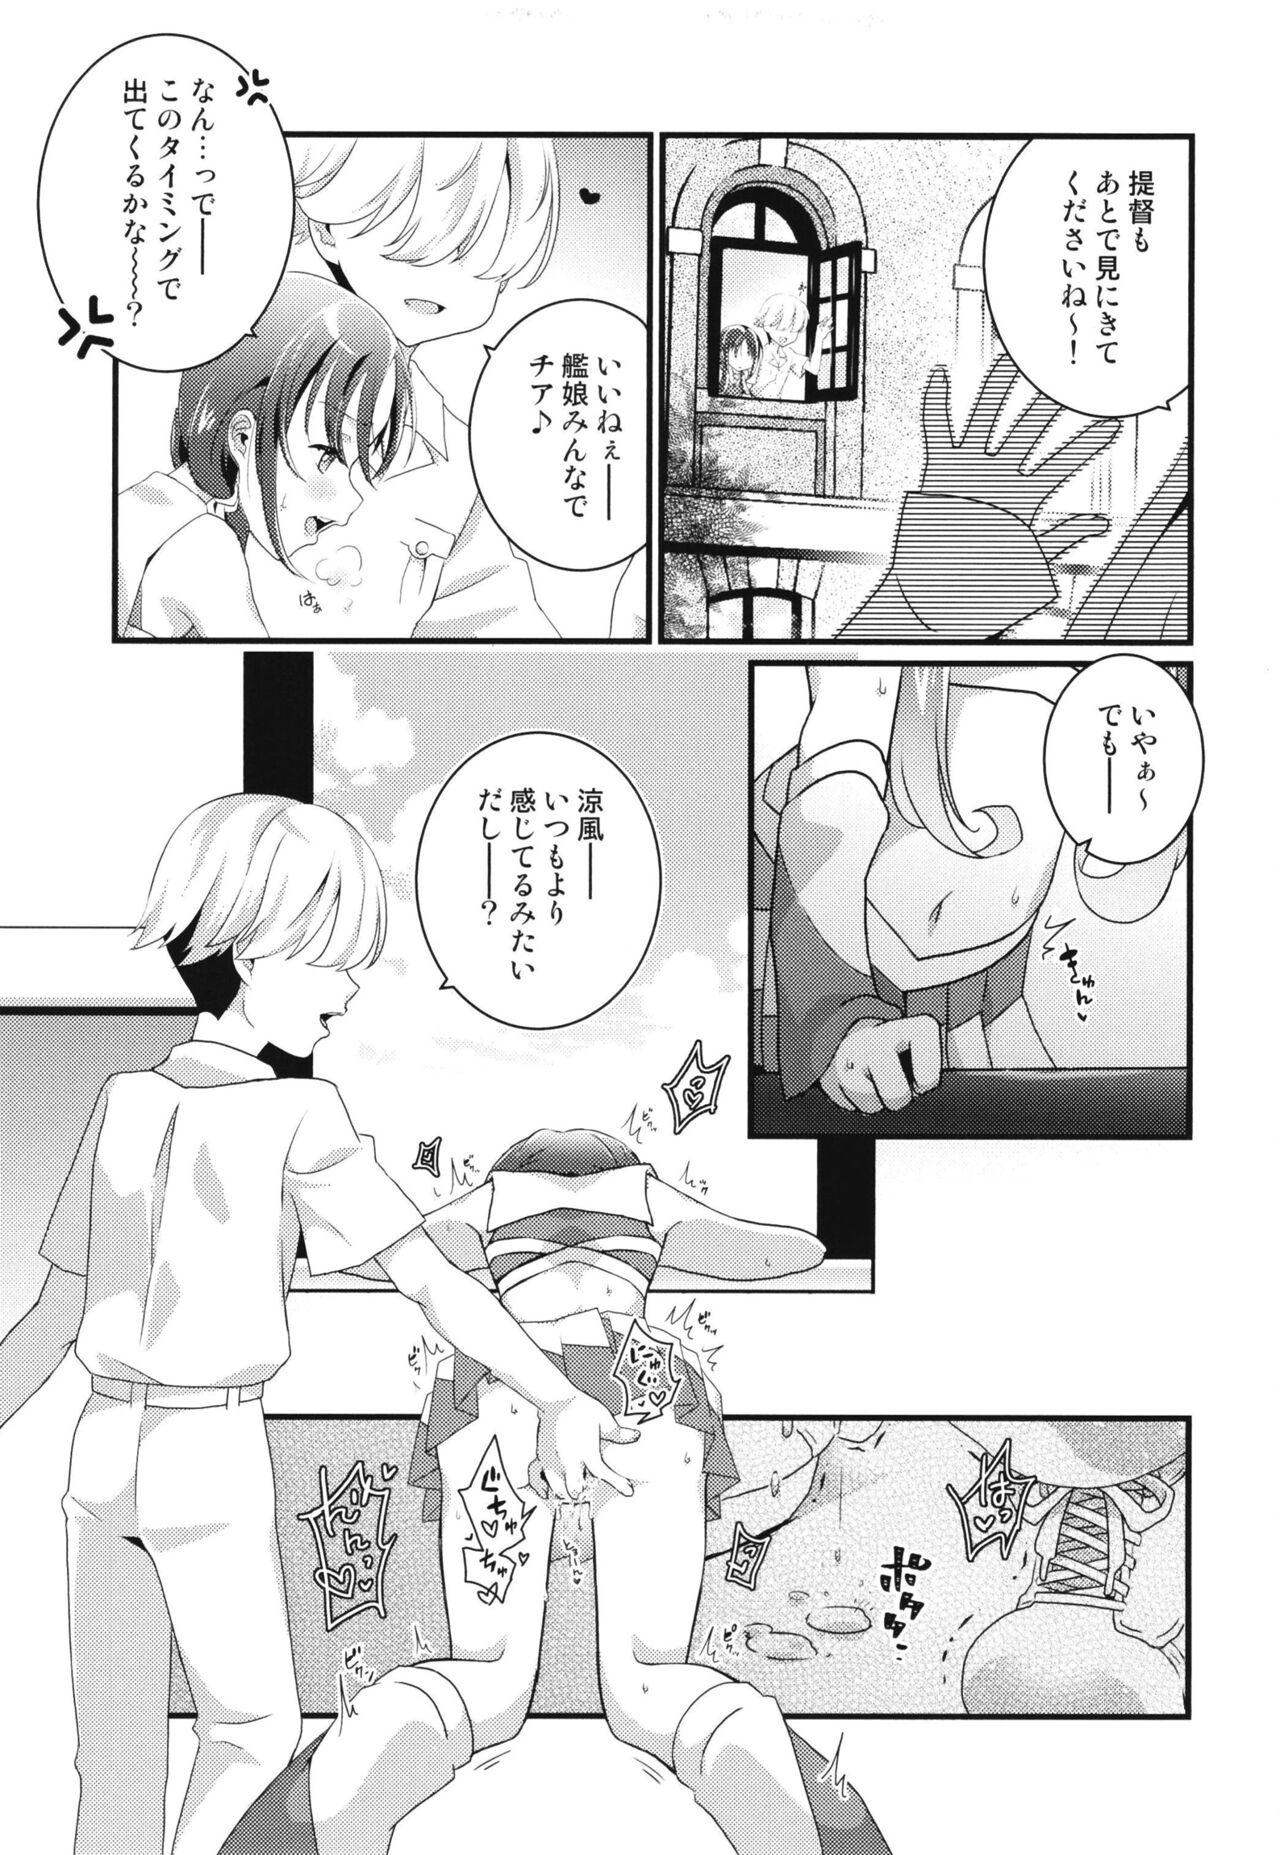 Forwomen Yah! Cheer! yeah! - Kantai collection Fist - Page 5